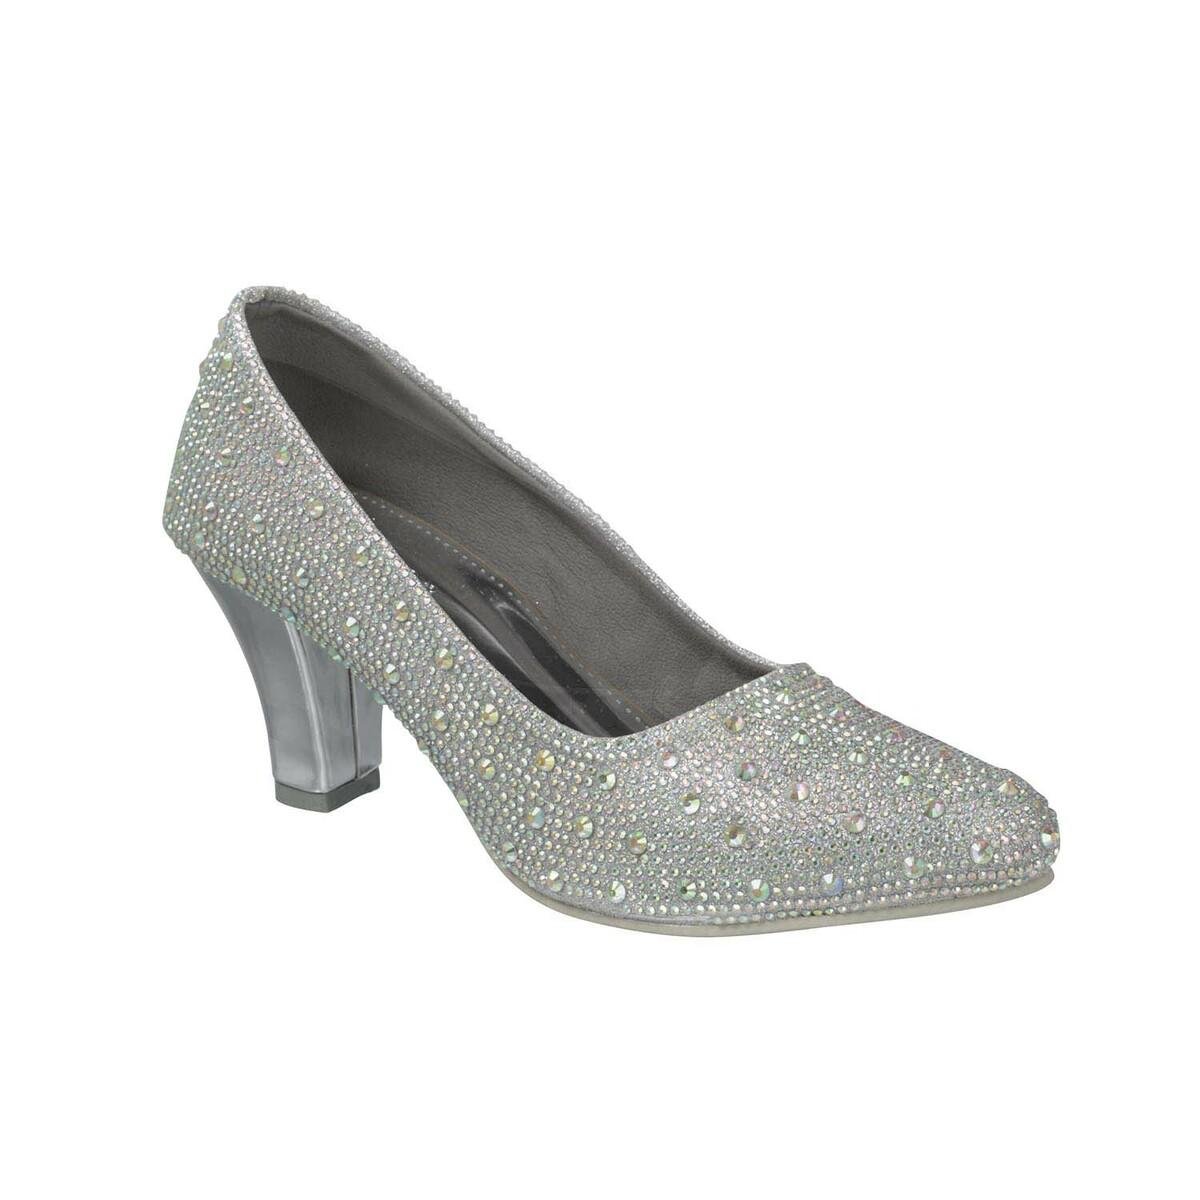 Lib Pointed Toe 3 inches Stiletto Heels Sequins Classic Pumps - Thick Silver  in Sexy Heels & Platforms - $89.67